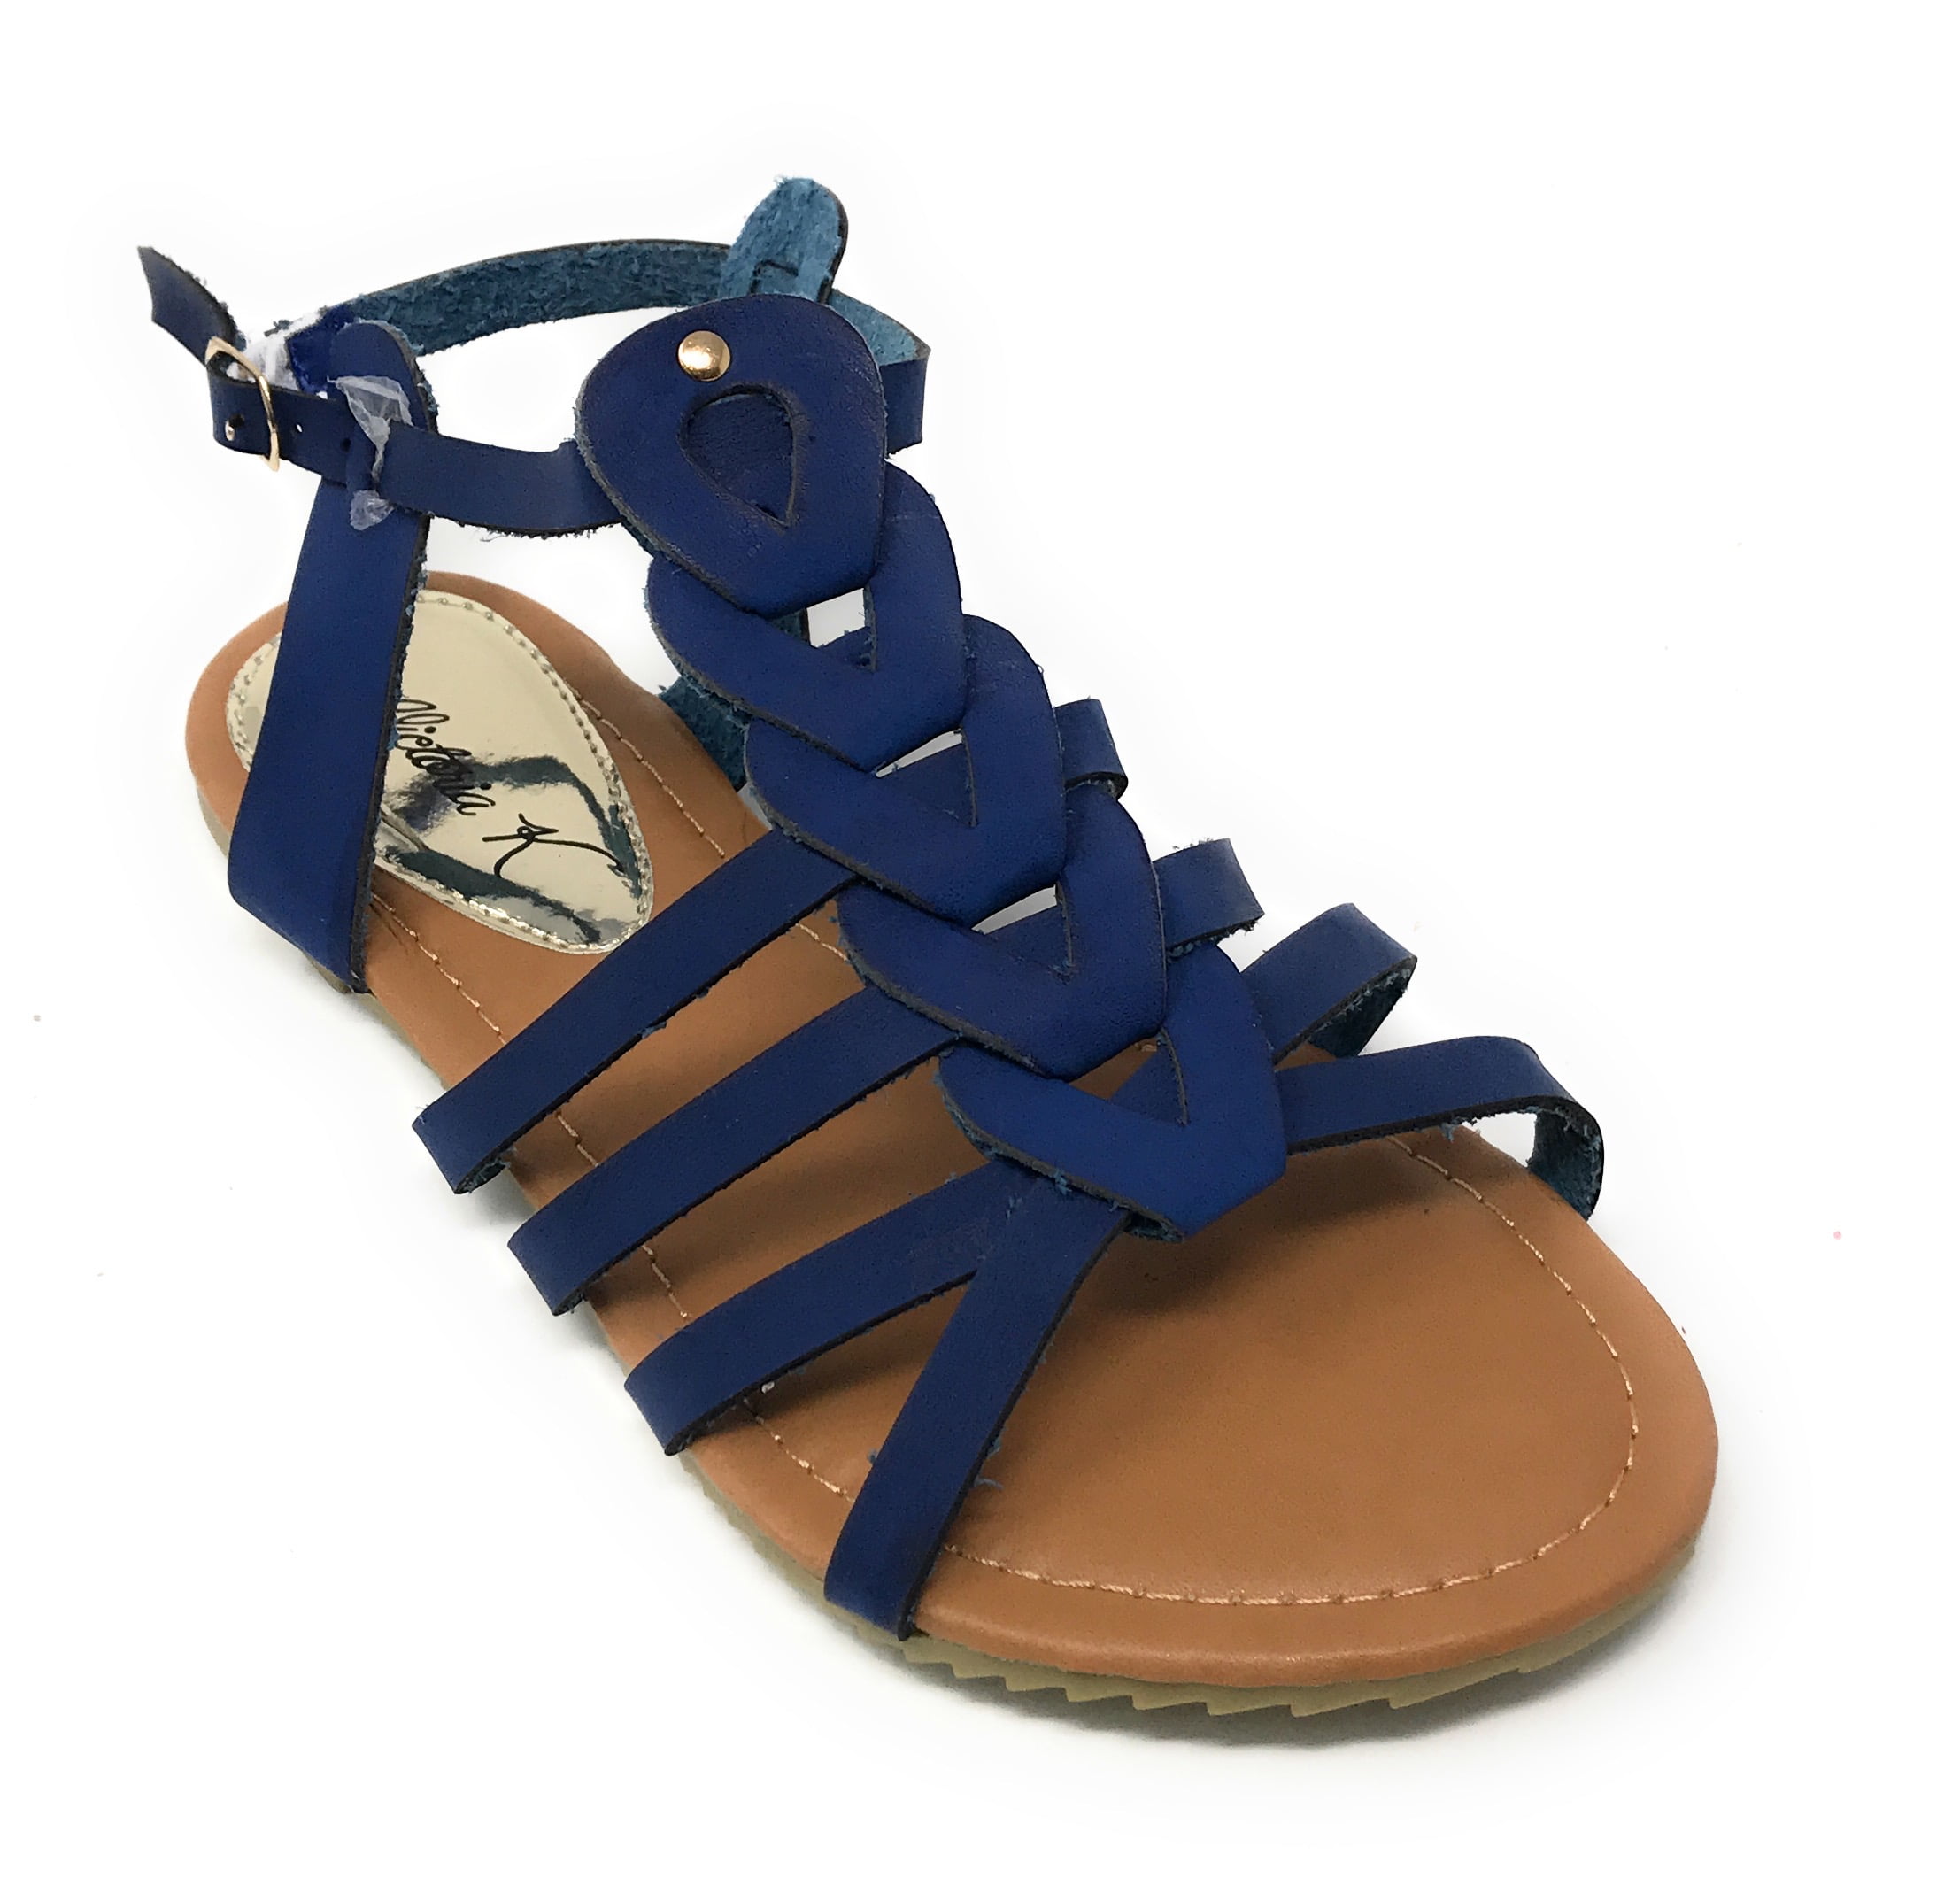 Womens Gladiator T.Strap front With Embelished Buckle  Sandals Flats Victoria K 